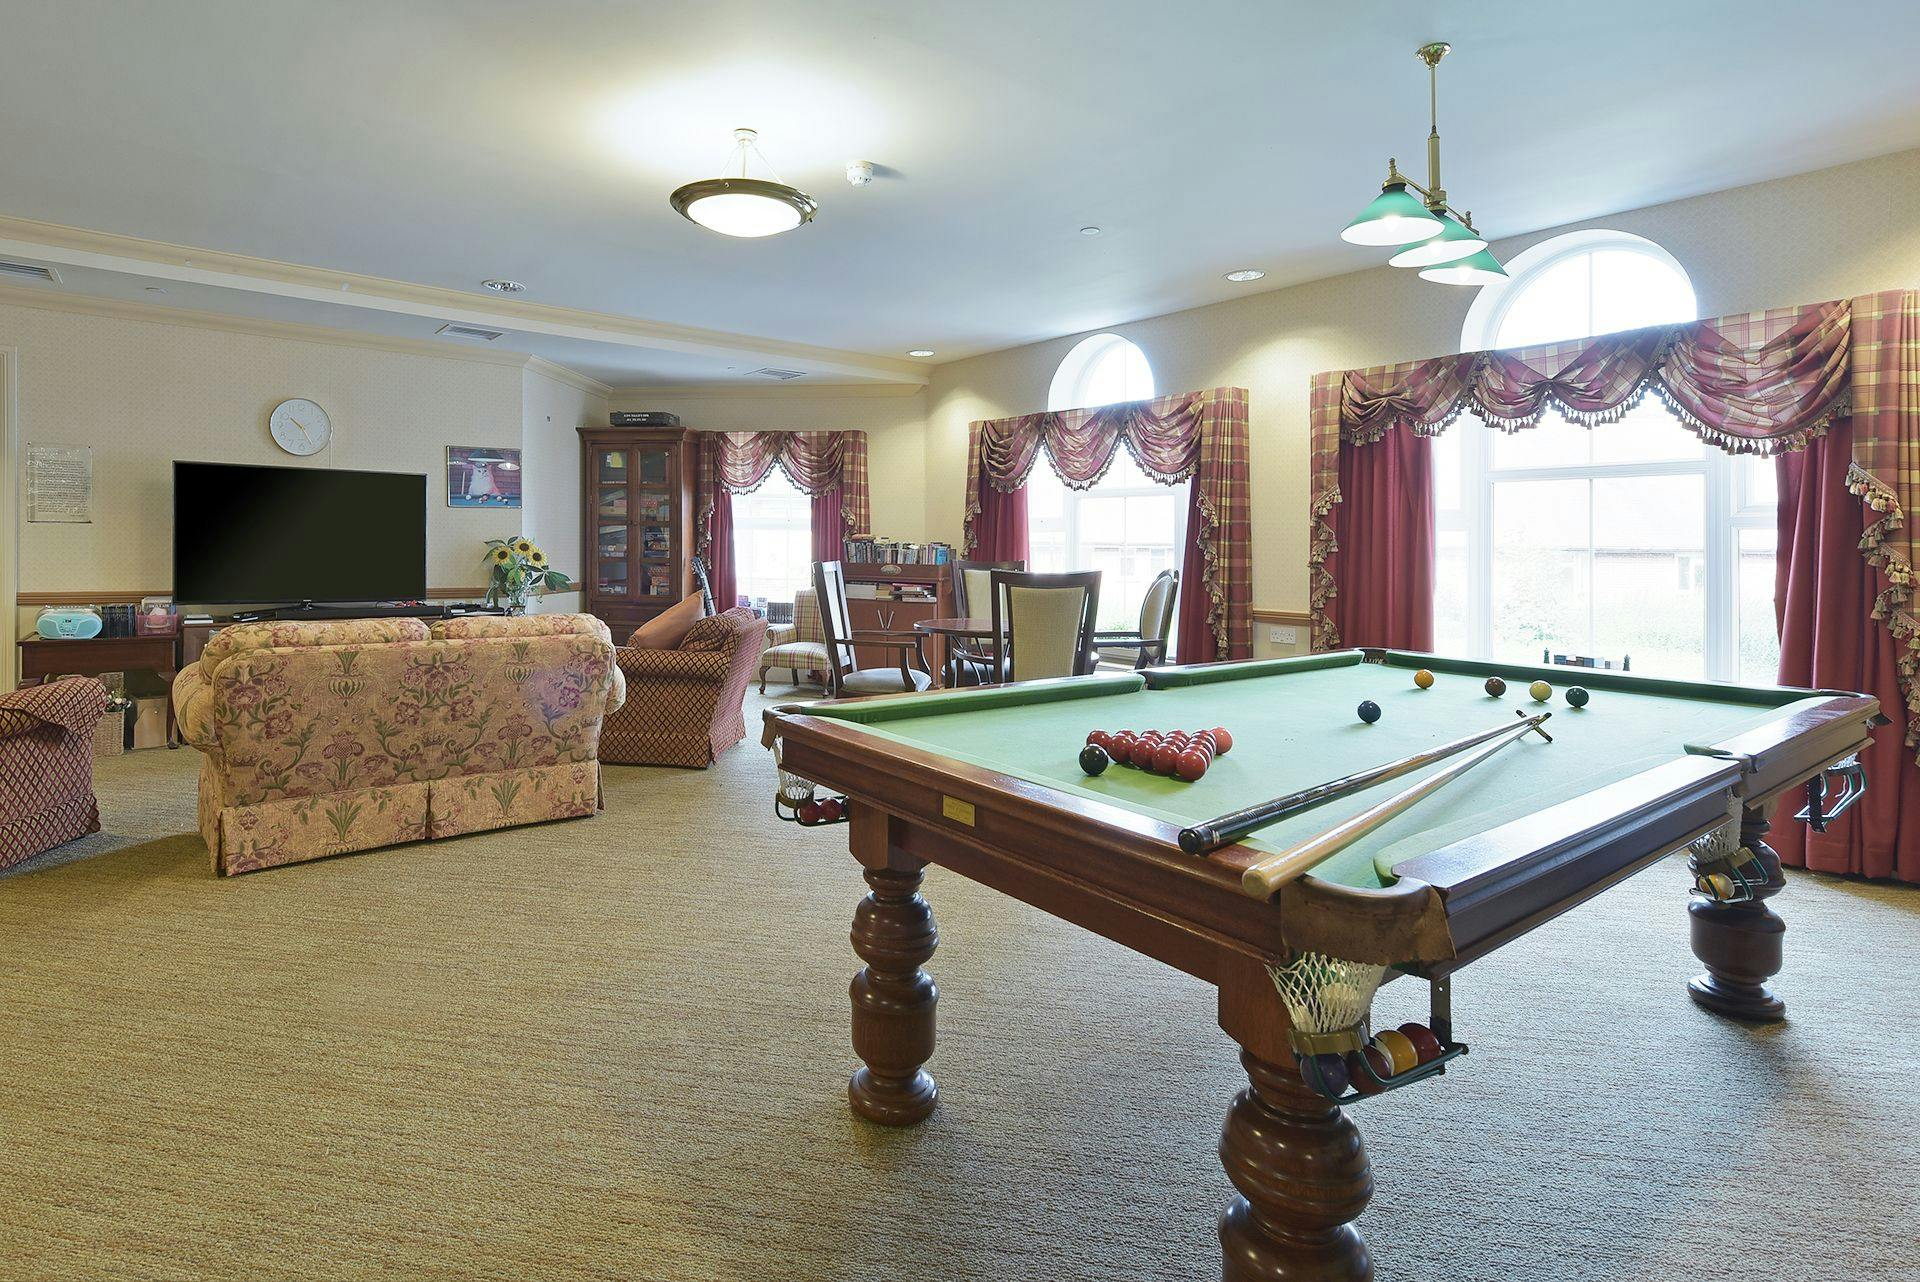 Games room of Westbourne Tower care home in Bournemouth, Hampshire